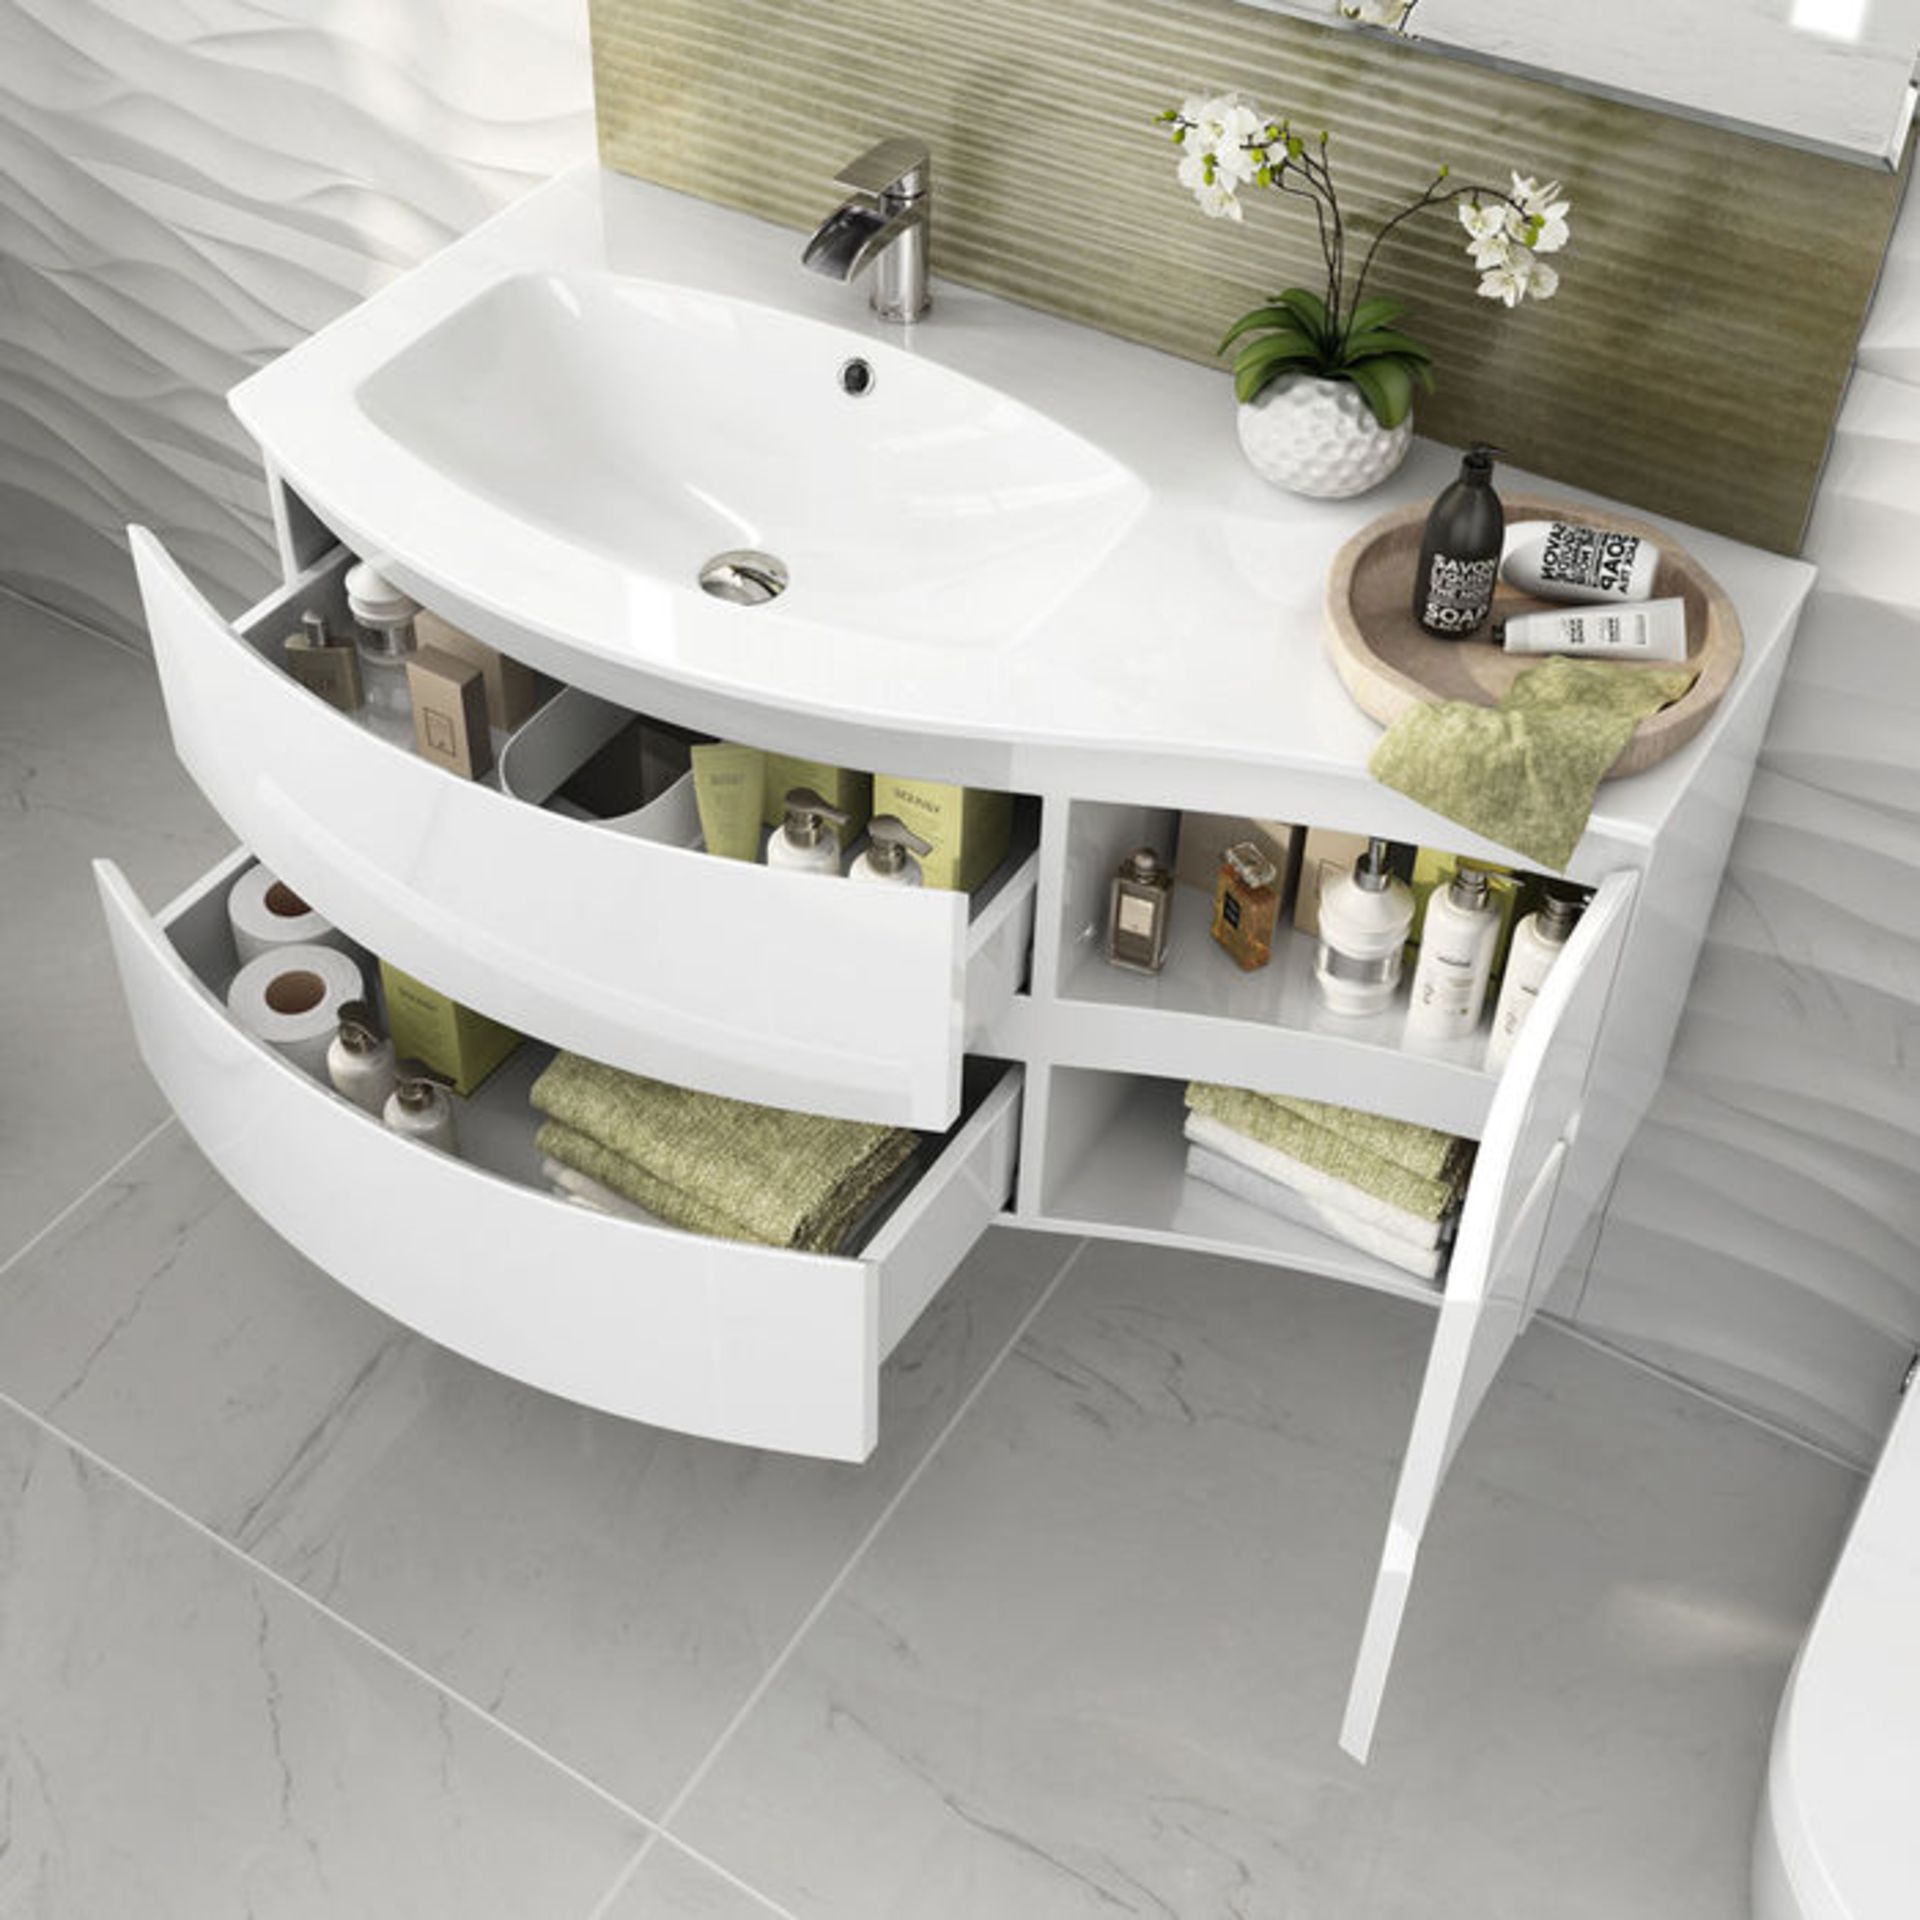 (AH4) 1040mm Amelie High Gloss White Curved Vanity Unit - Left Hand - Wall Hung. This premium option - Image 3 of 4